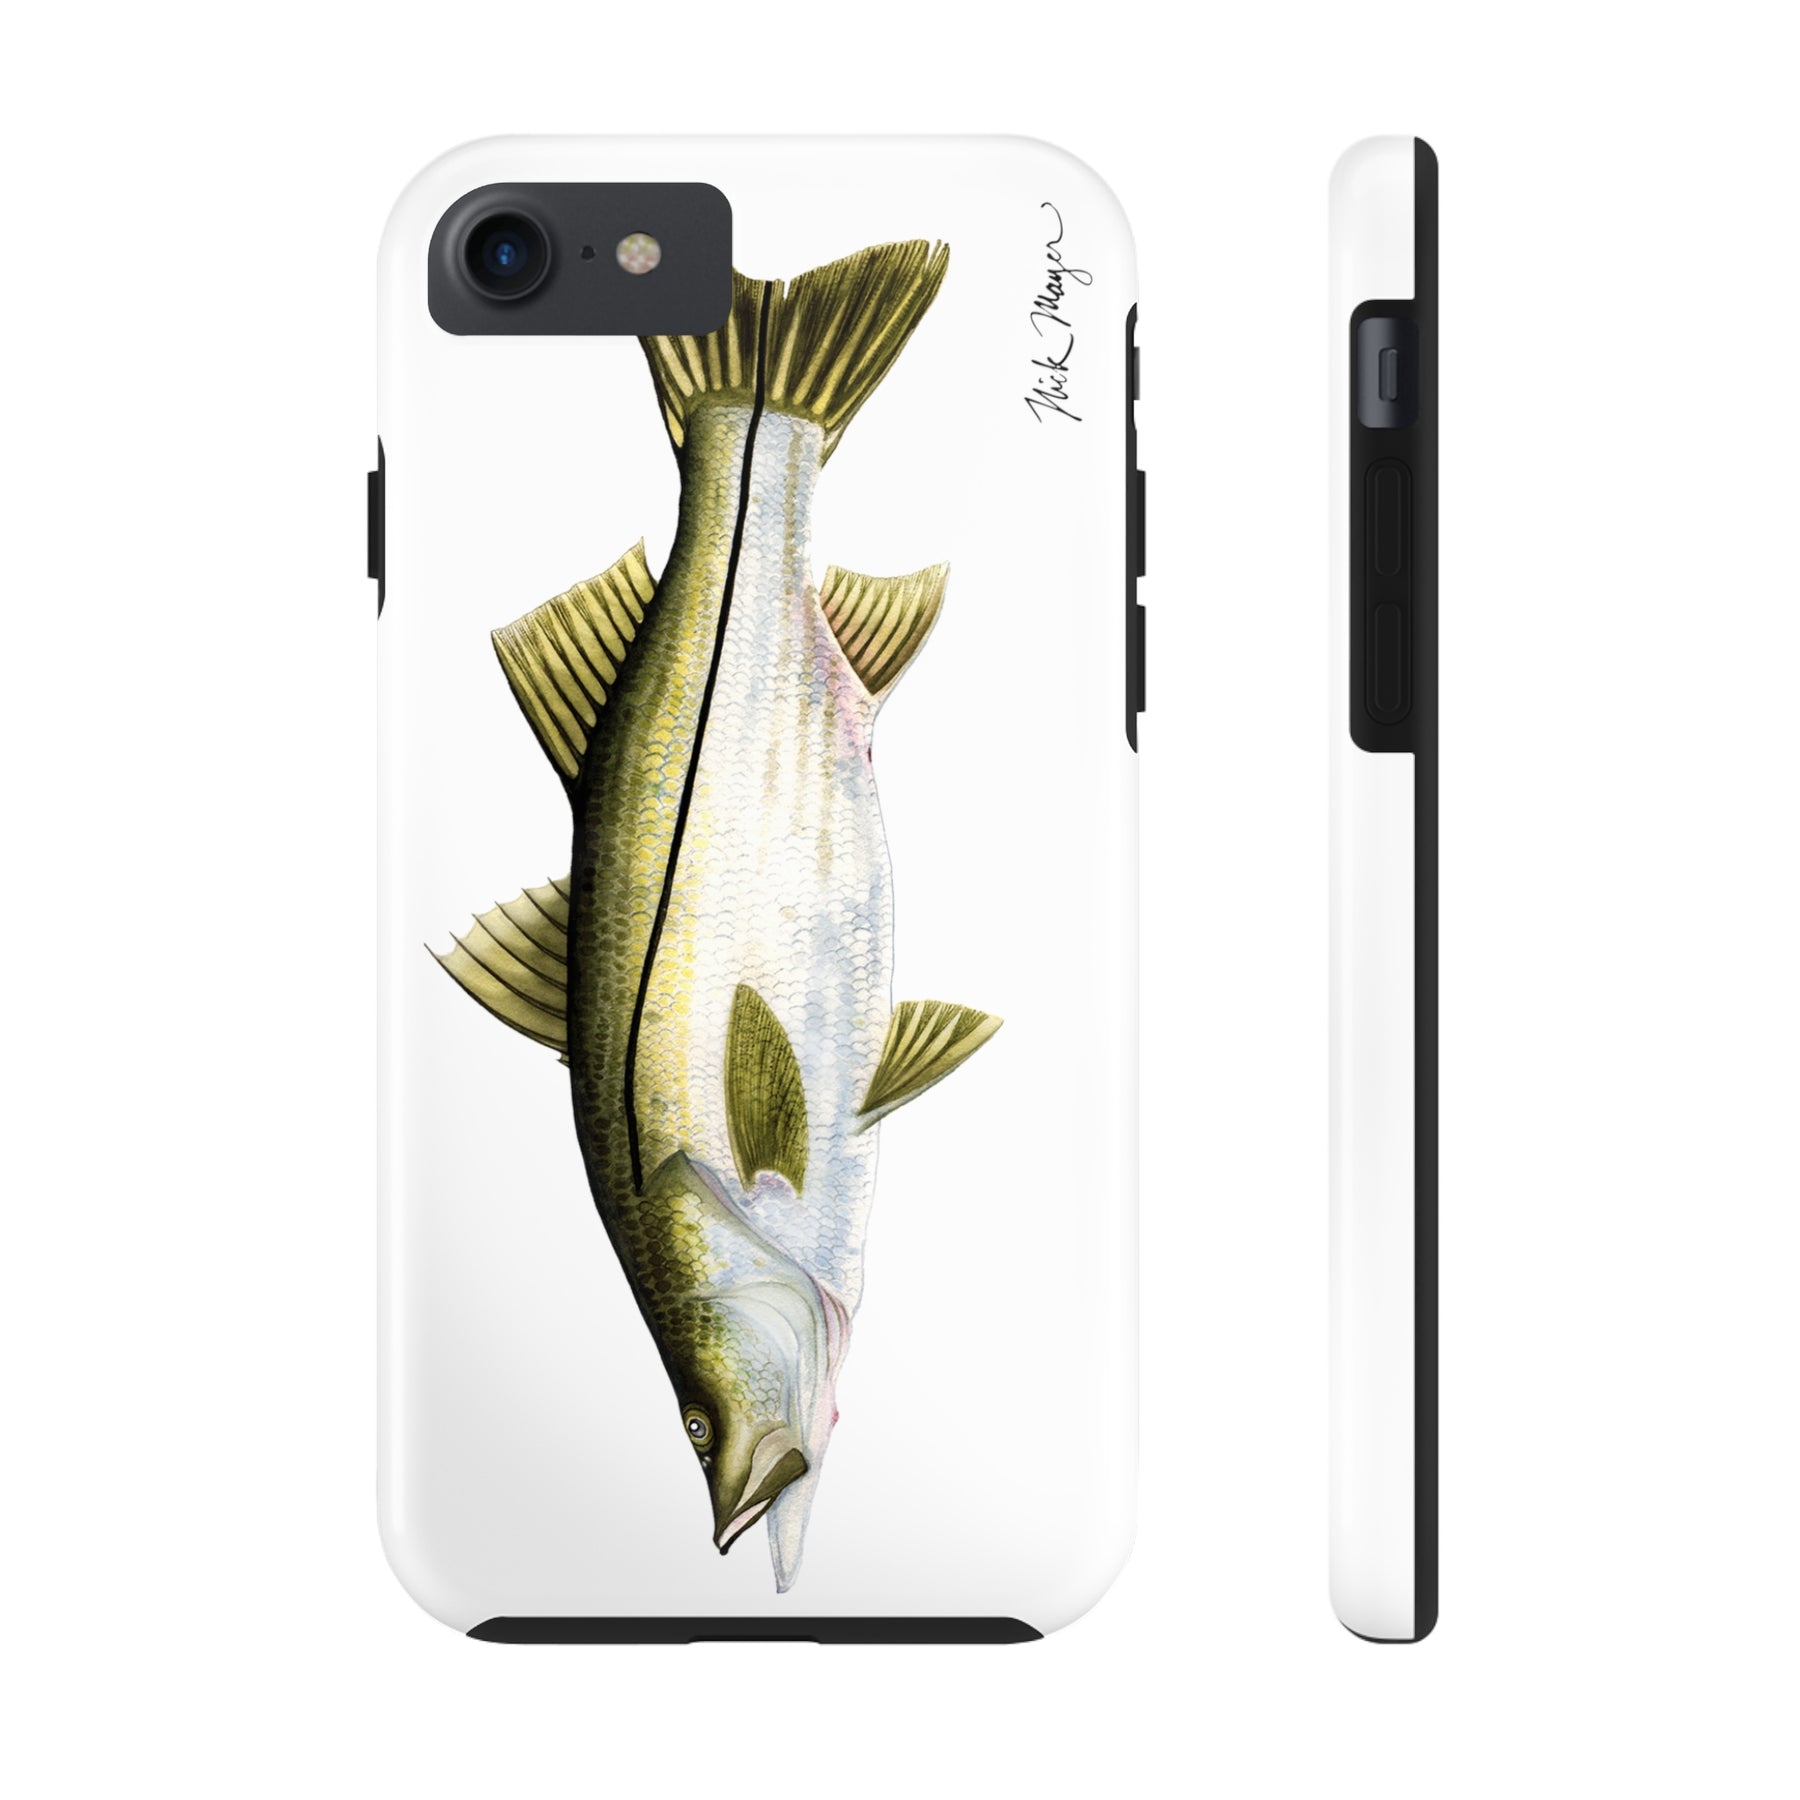 Snook Phone Case: Durable & Stylish Protection for iPhone